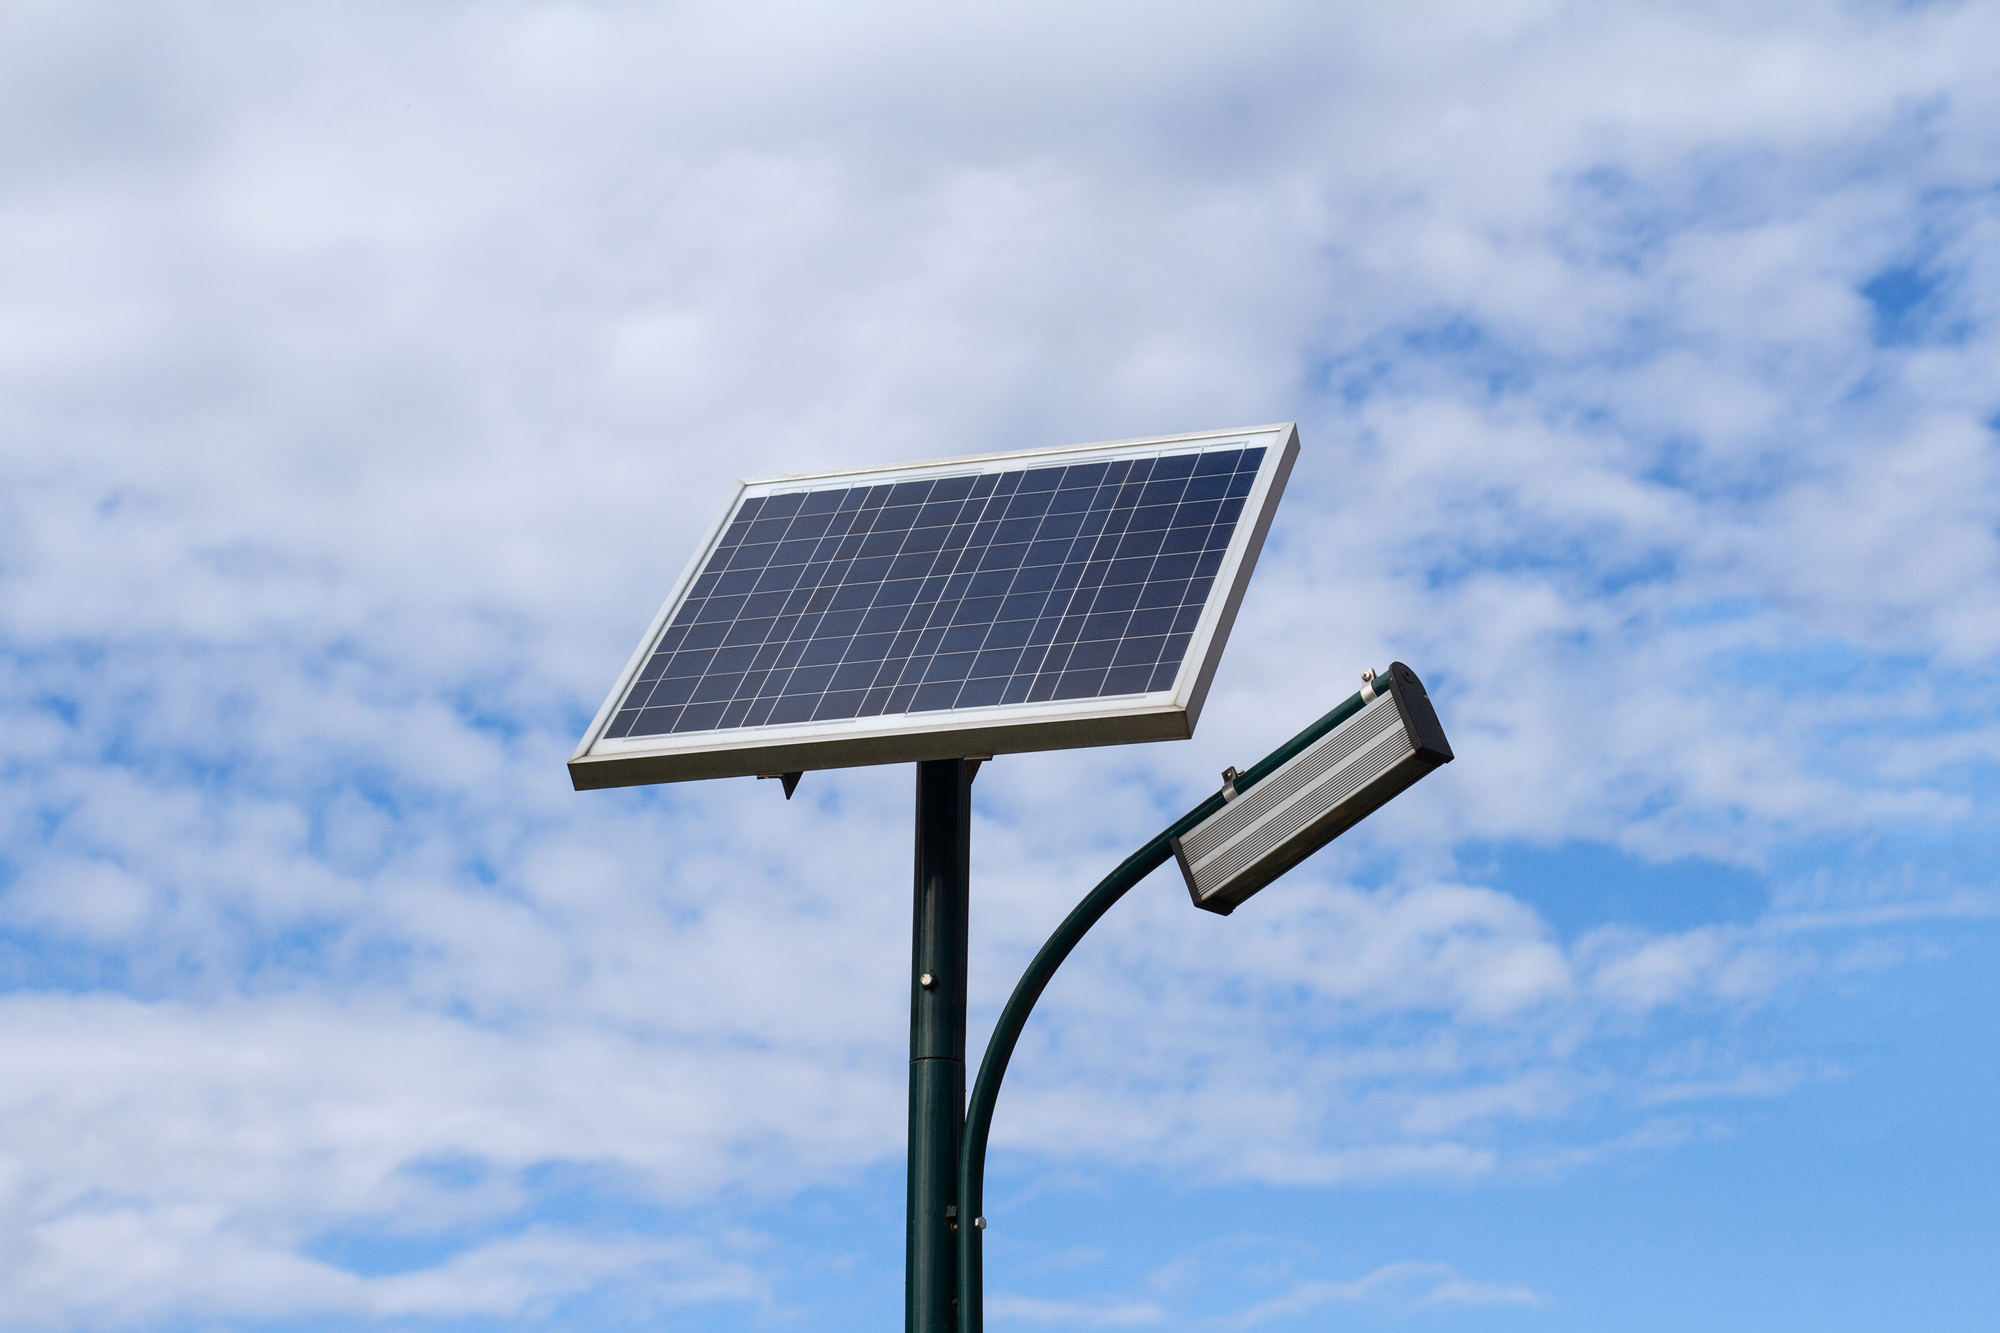 The Best Light With Style With Supreme Quality Solar Lights